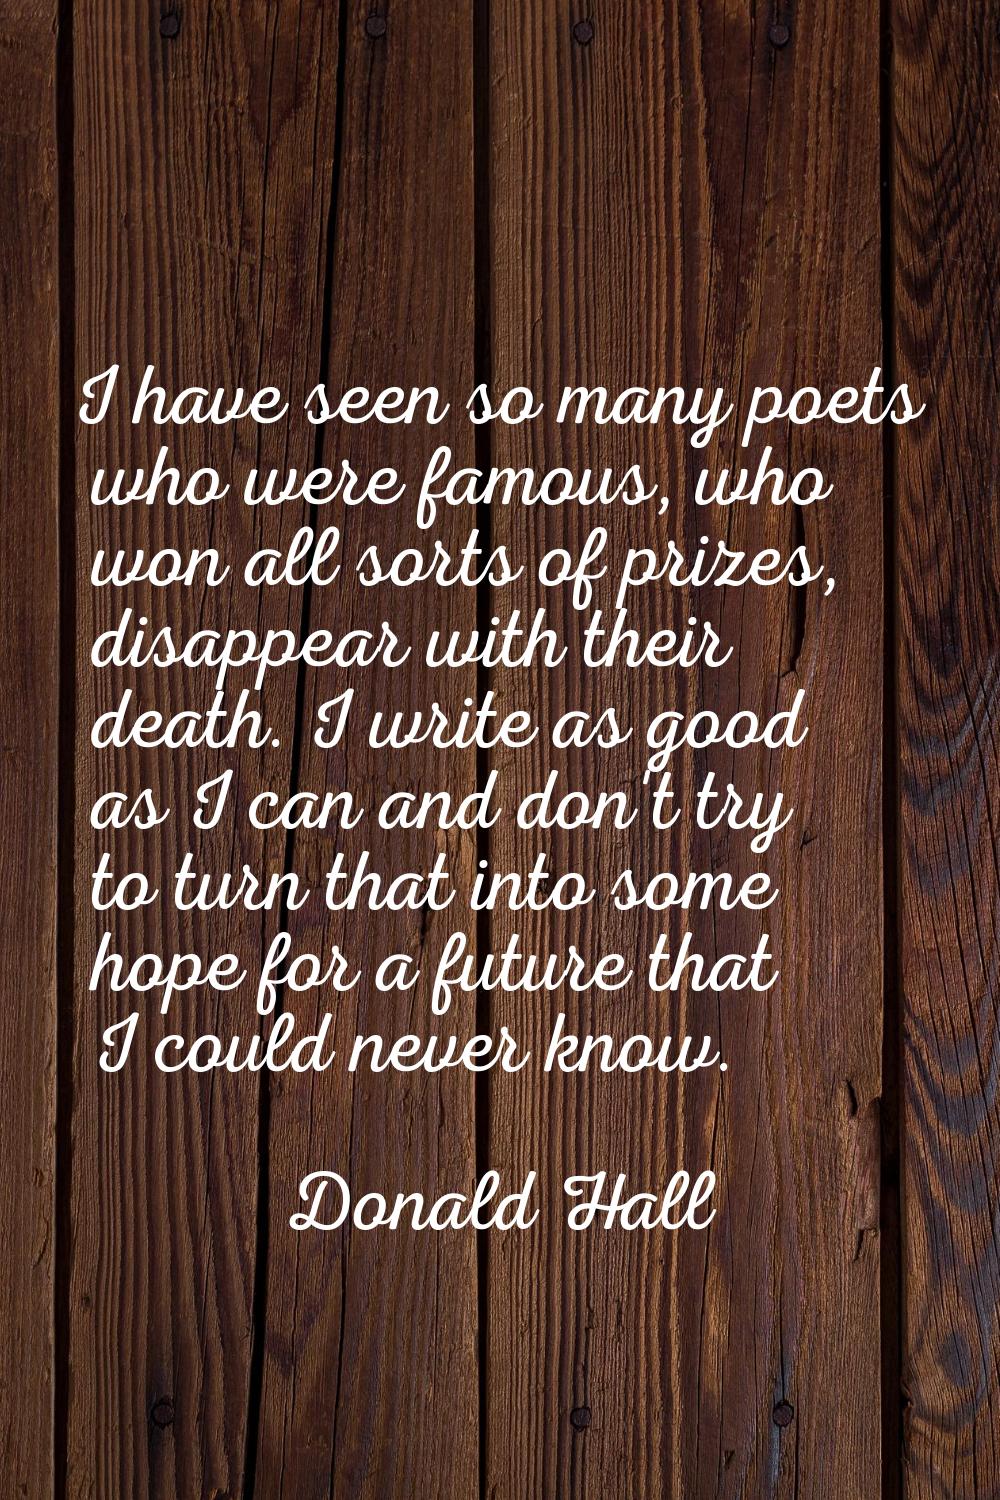 I have seen so many poets who were famous, who won all sorts of prizes, disappear with their death.